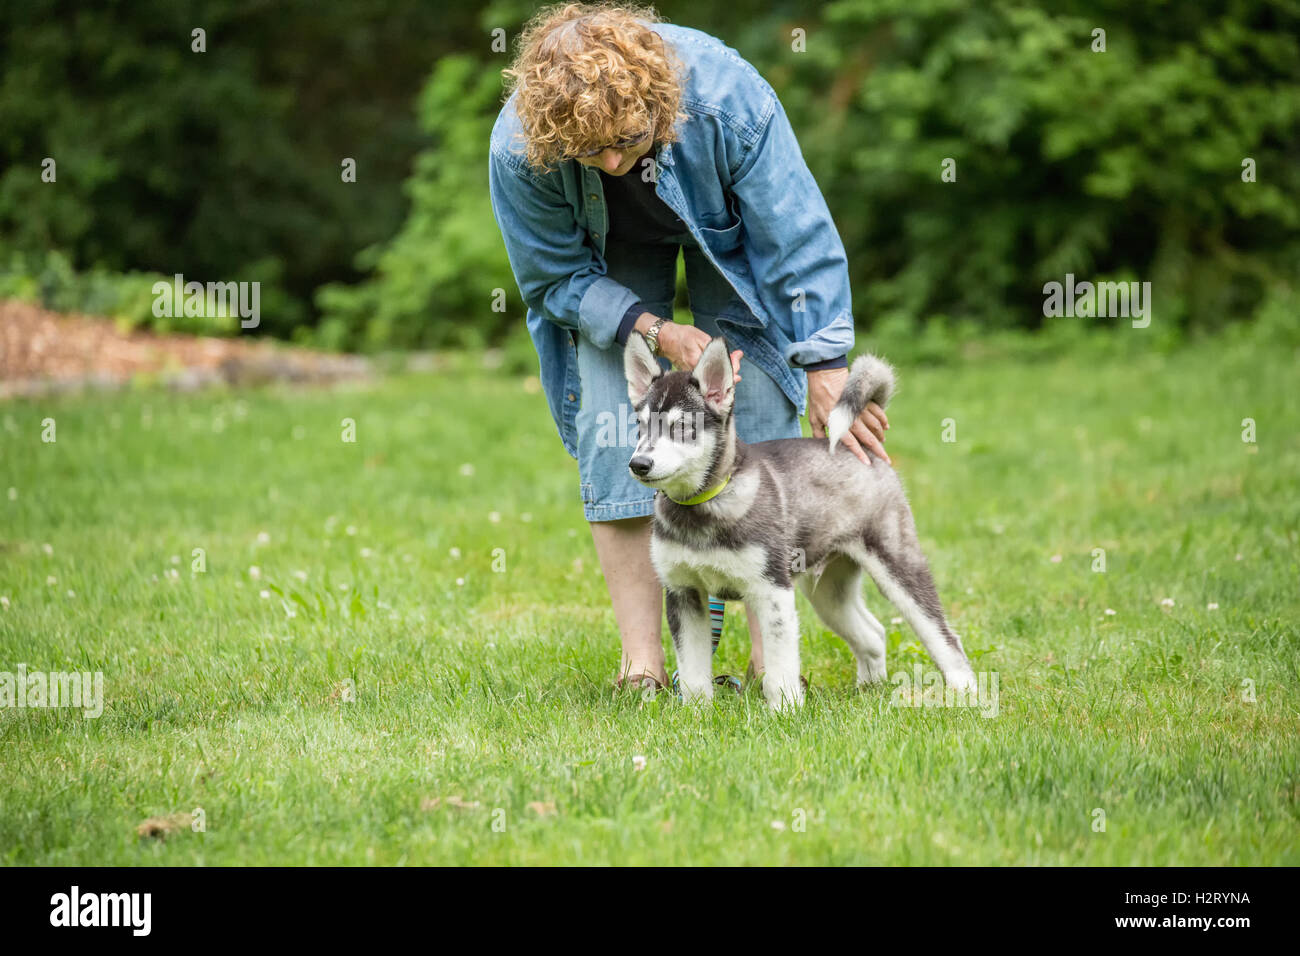 Dashiell, a three month old Alaskan Malamute puppy, standing in a show pose on a 'stay' command in Issaquah, Washington, USA Stock Photo